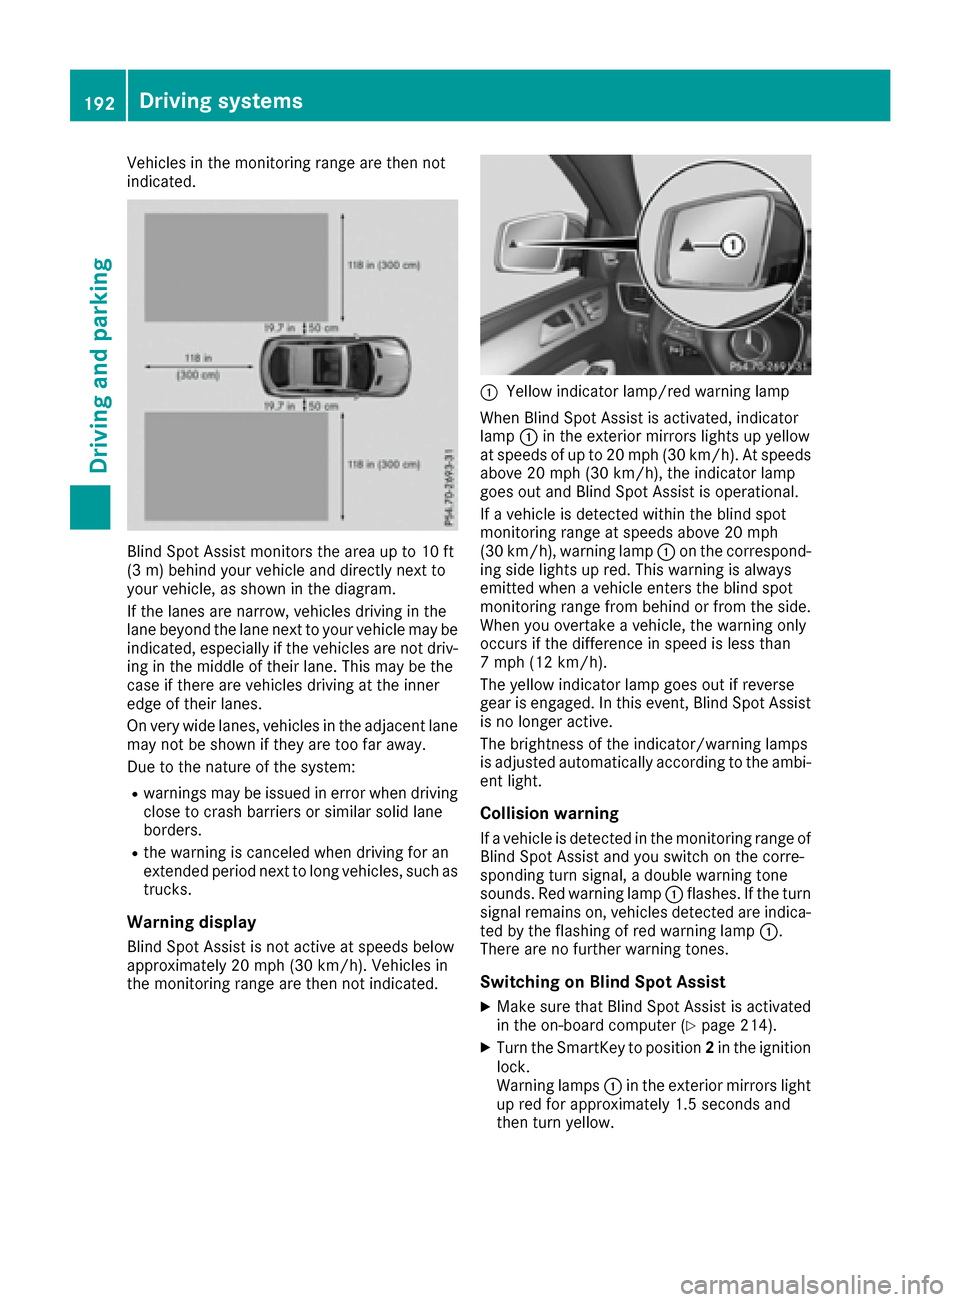 MERCEDES-BENZ GLE COUPE 2017 C292 Manual PDF Vehicles in the monitoring range are then not
indicated.
Blind Spot Assist monitors the area up to 10 ft
(3 m) behind your vehicle and directly next to
your vehicle, as shown in the diagram.
If the la